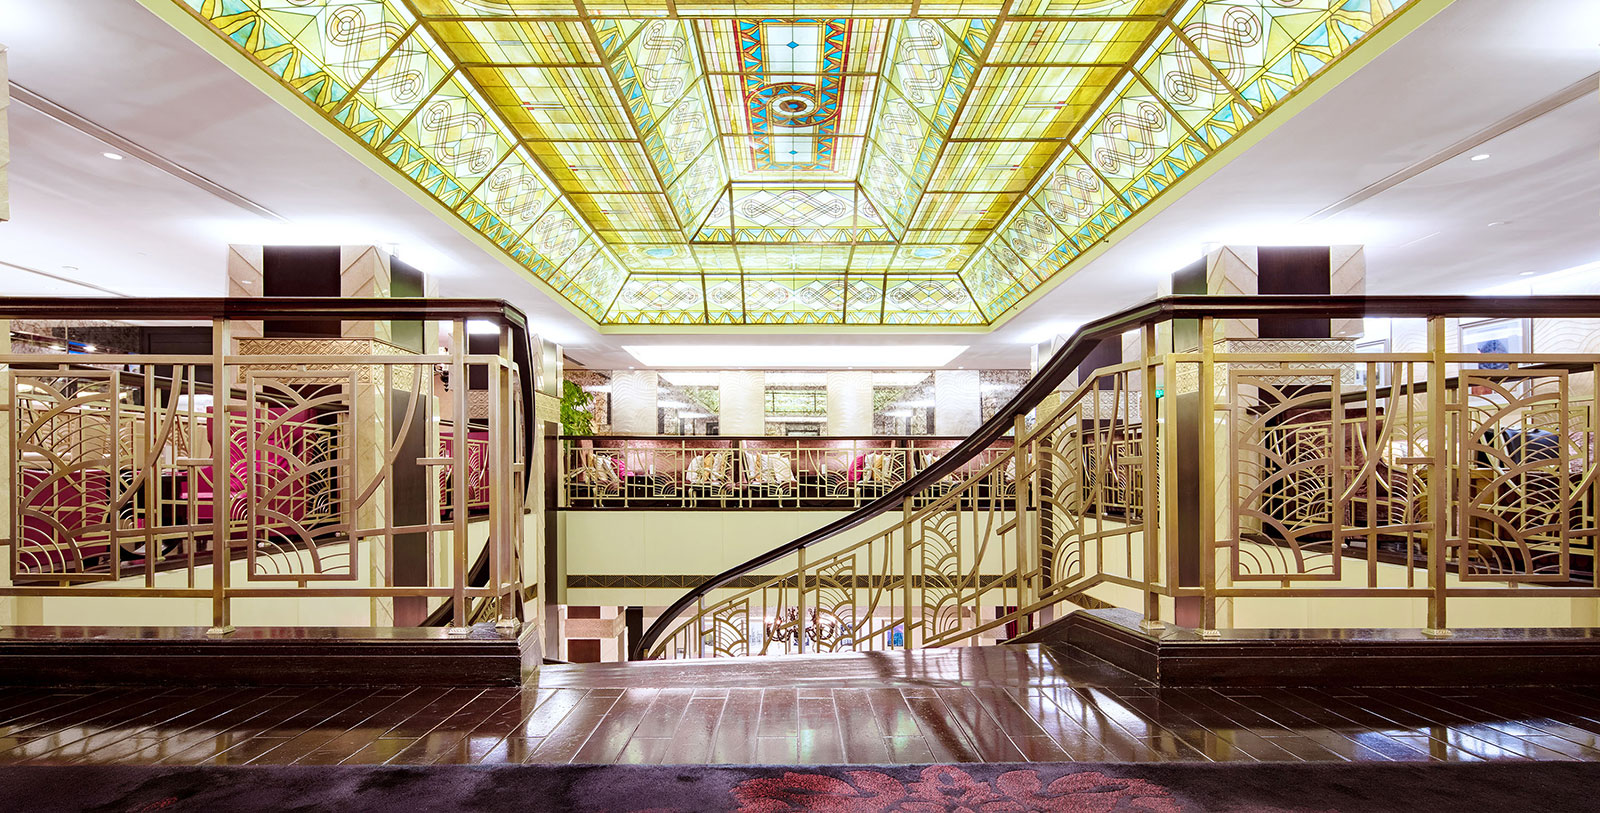 Image of Hotel Interiors and Glass Ceiling Detail, The Yangtze Boutique Shanghai, 1933, Member of Historic Hotels Worldwide, Shanghai, China, Hot Deals